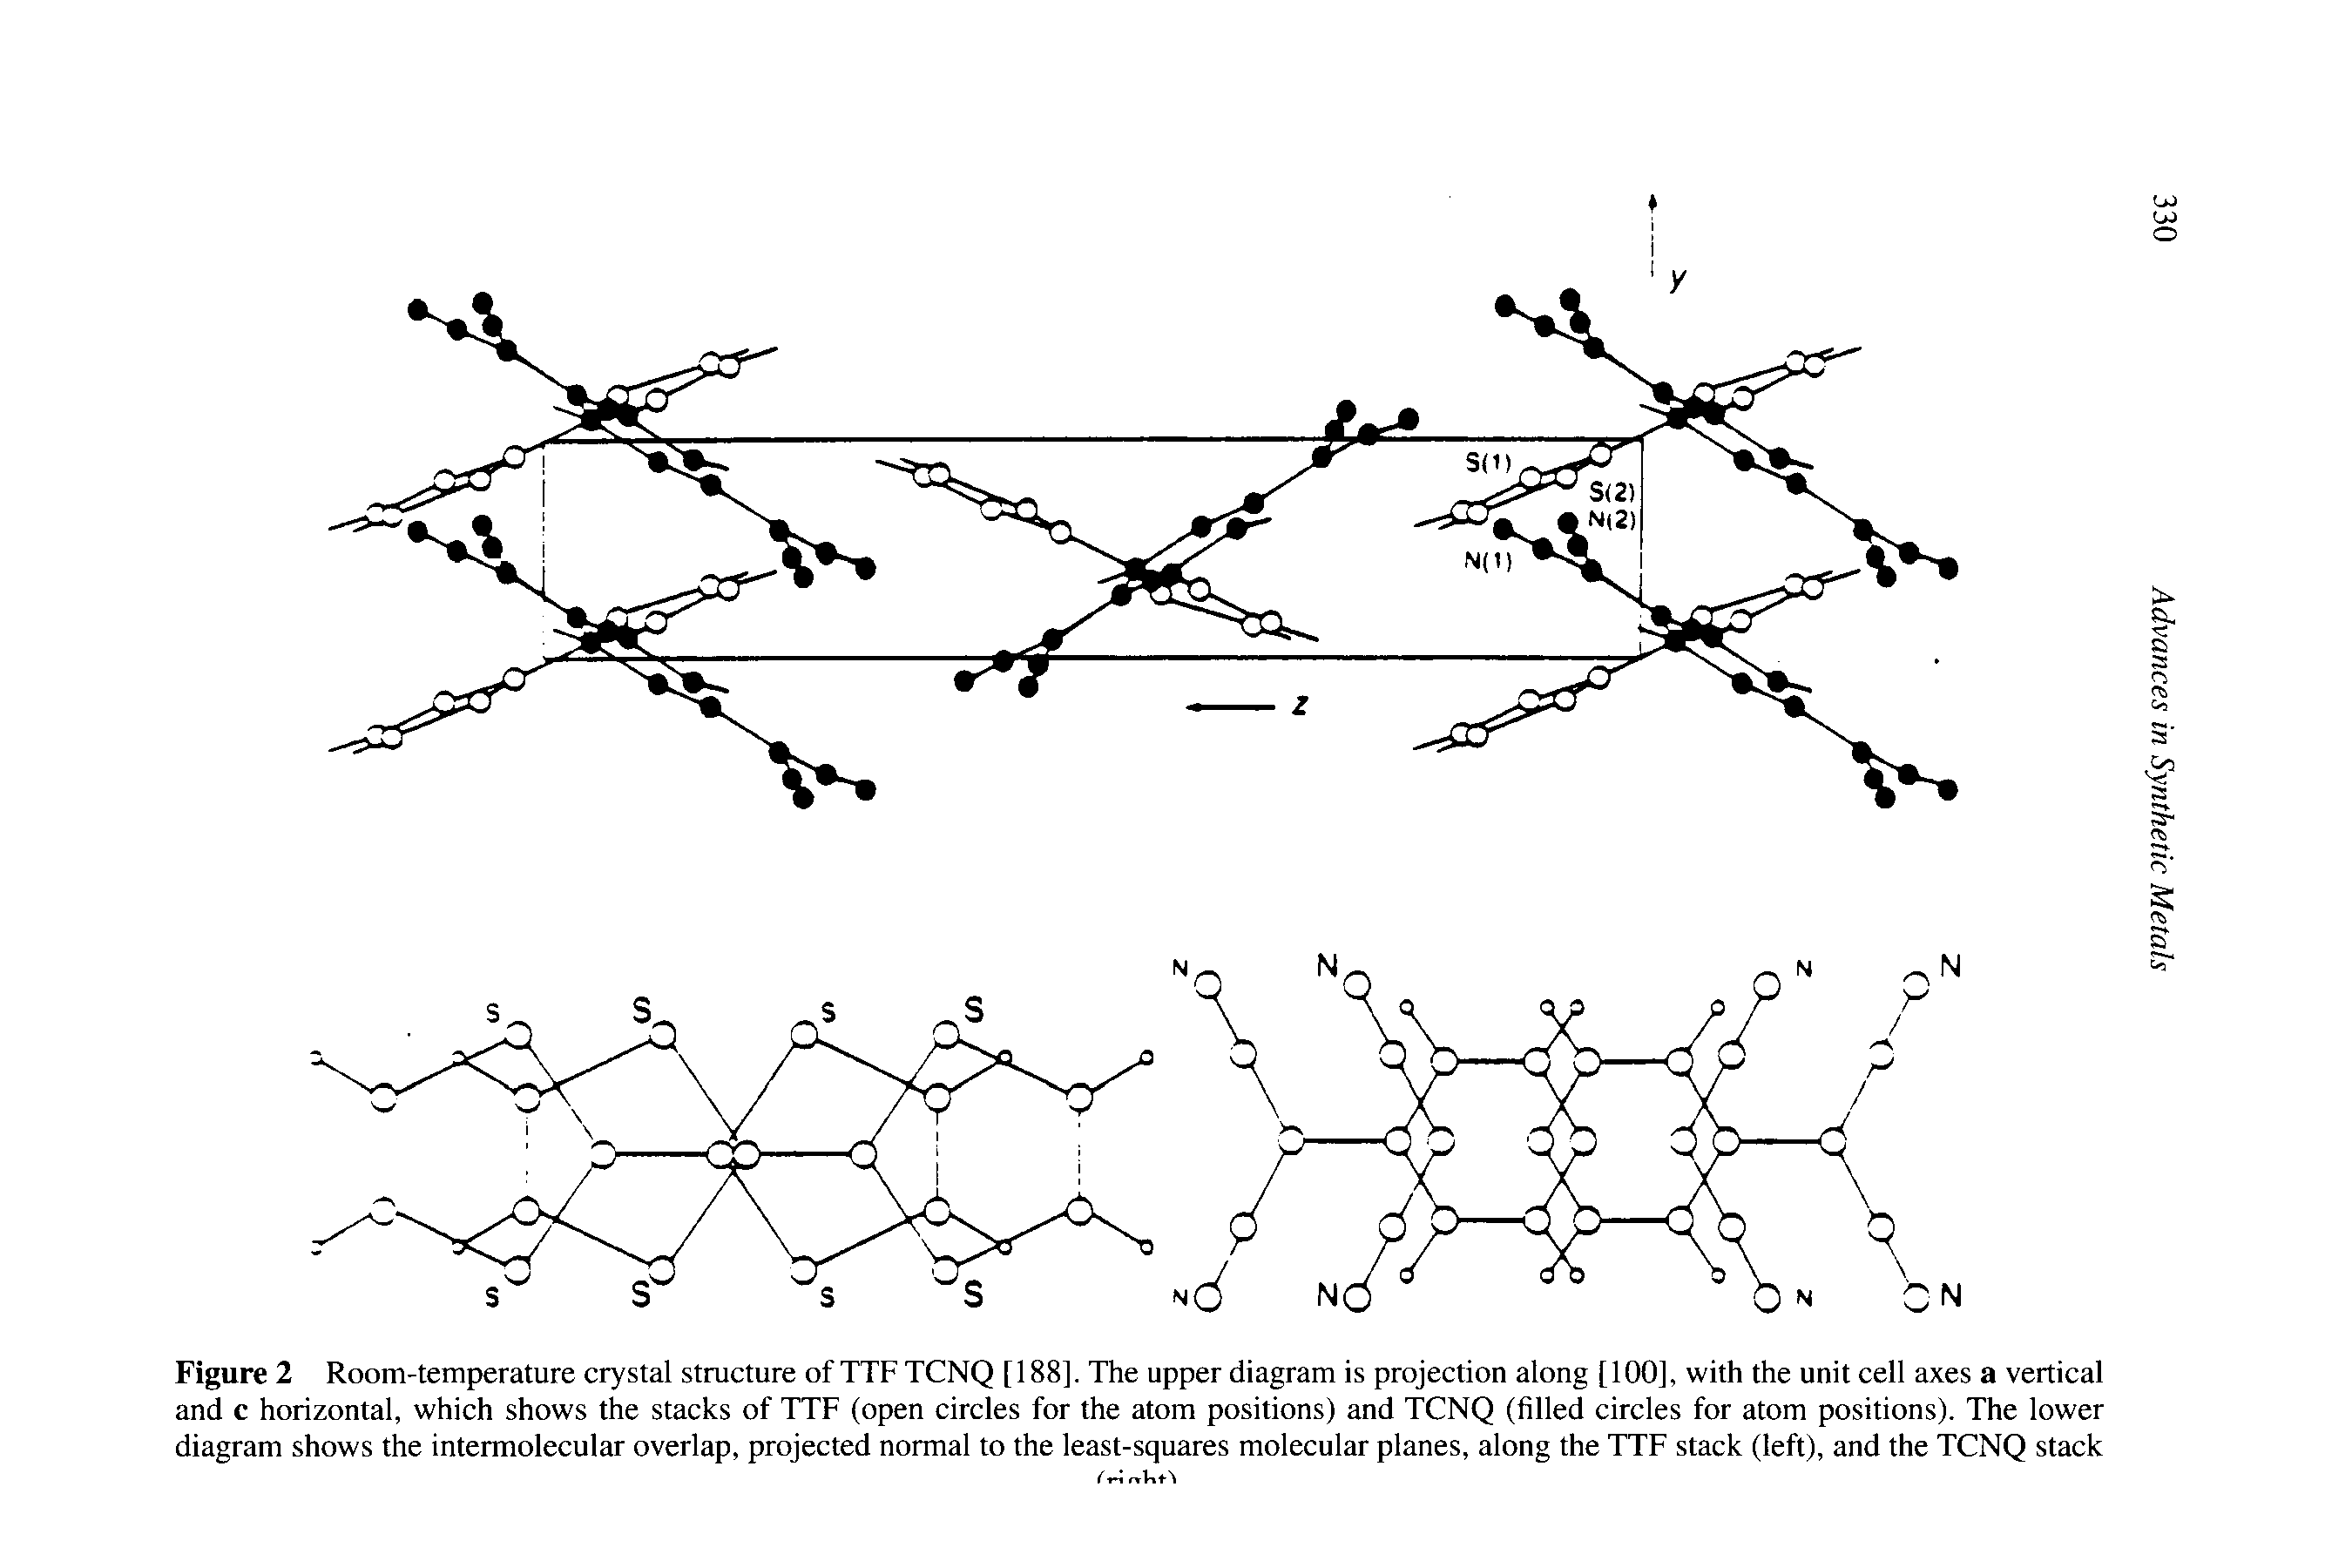 Figure 2 Room-temperature crystal structure of TTF TCNQ [188]. The upper diagram is projection along [ 100], with the unit cell axes a vertical and c horizontal, which shows the stacks of TTF (open circles for the atom positions) and TCNQ (filled circles for atom positions). The lower diagram shows the intermolecular overlap, projected normal to the least-squares molecular planes, along the TTF stack (left), and the TCNQ stack...